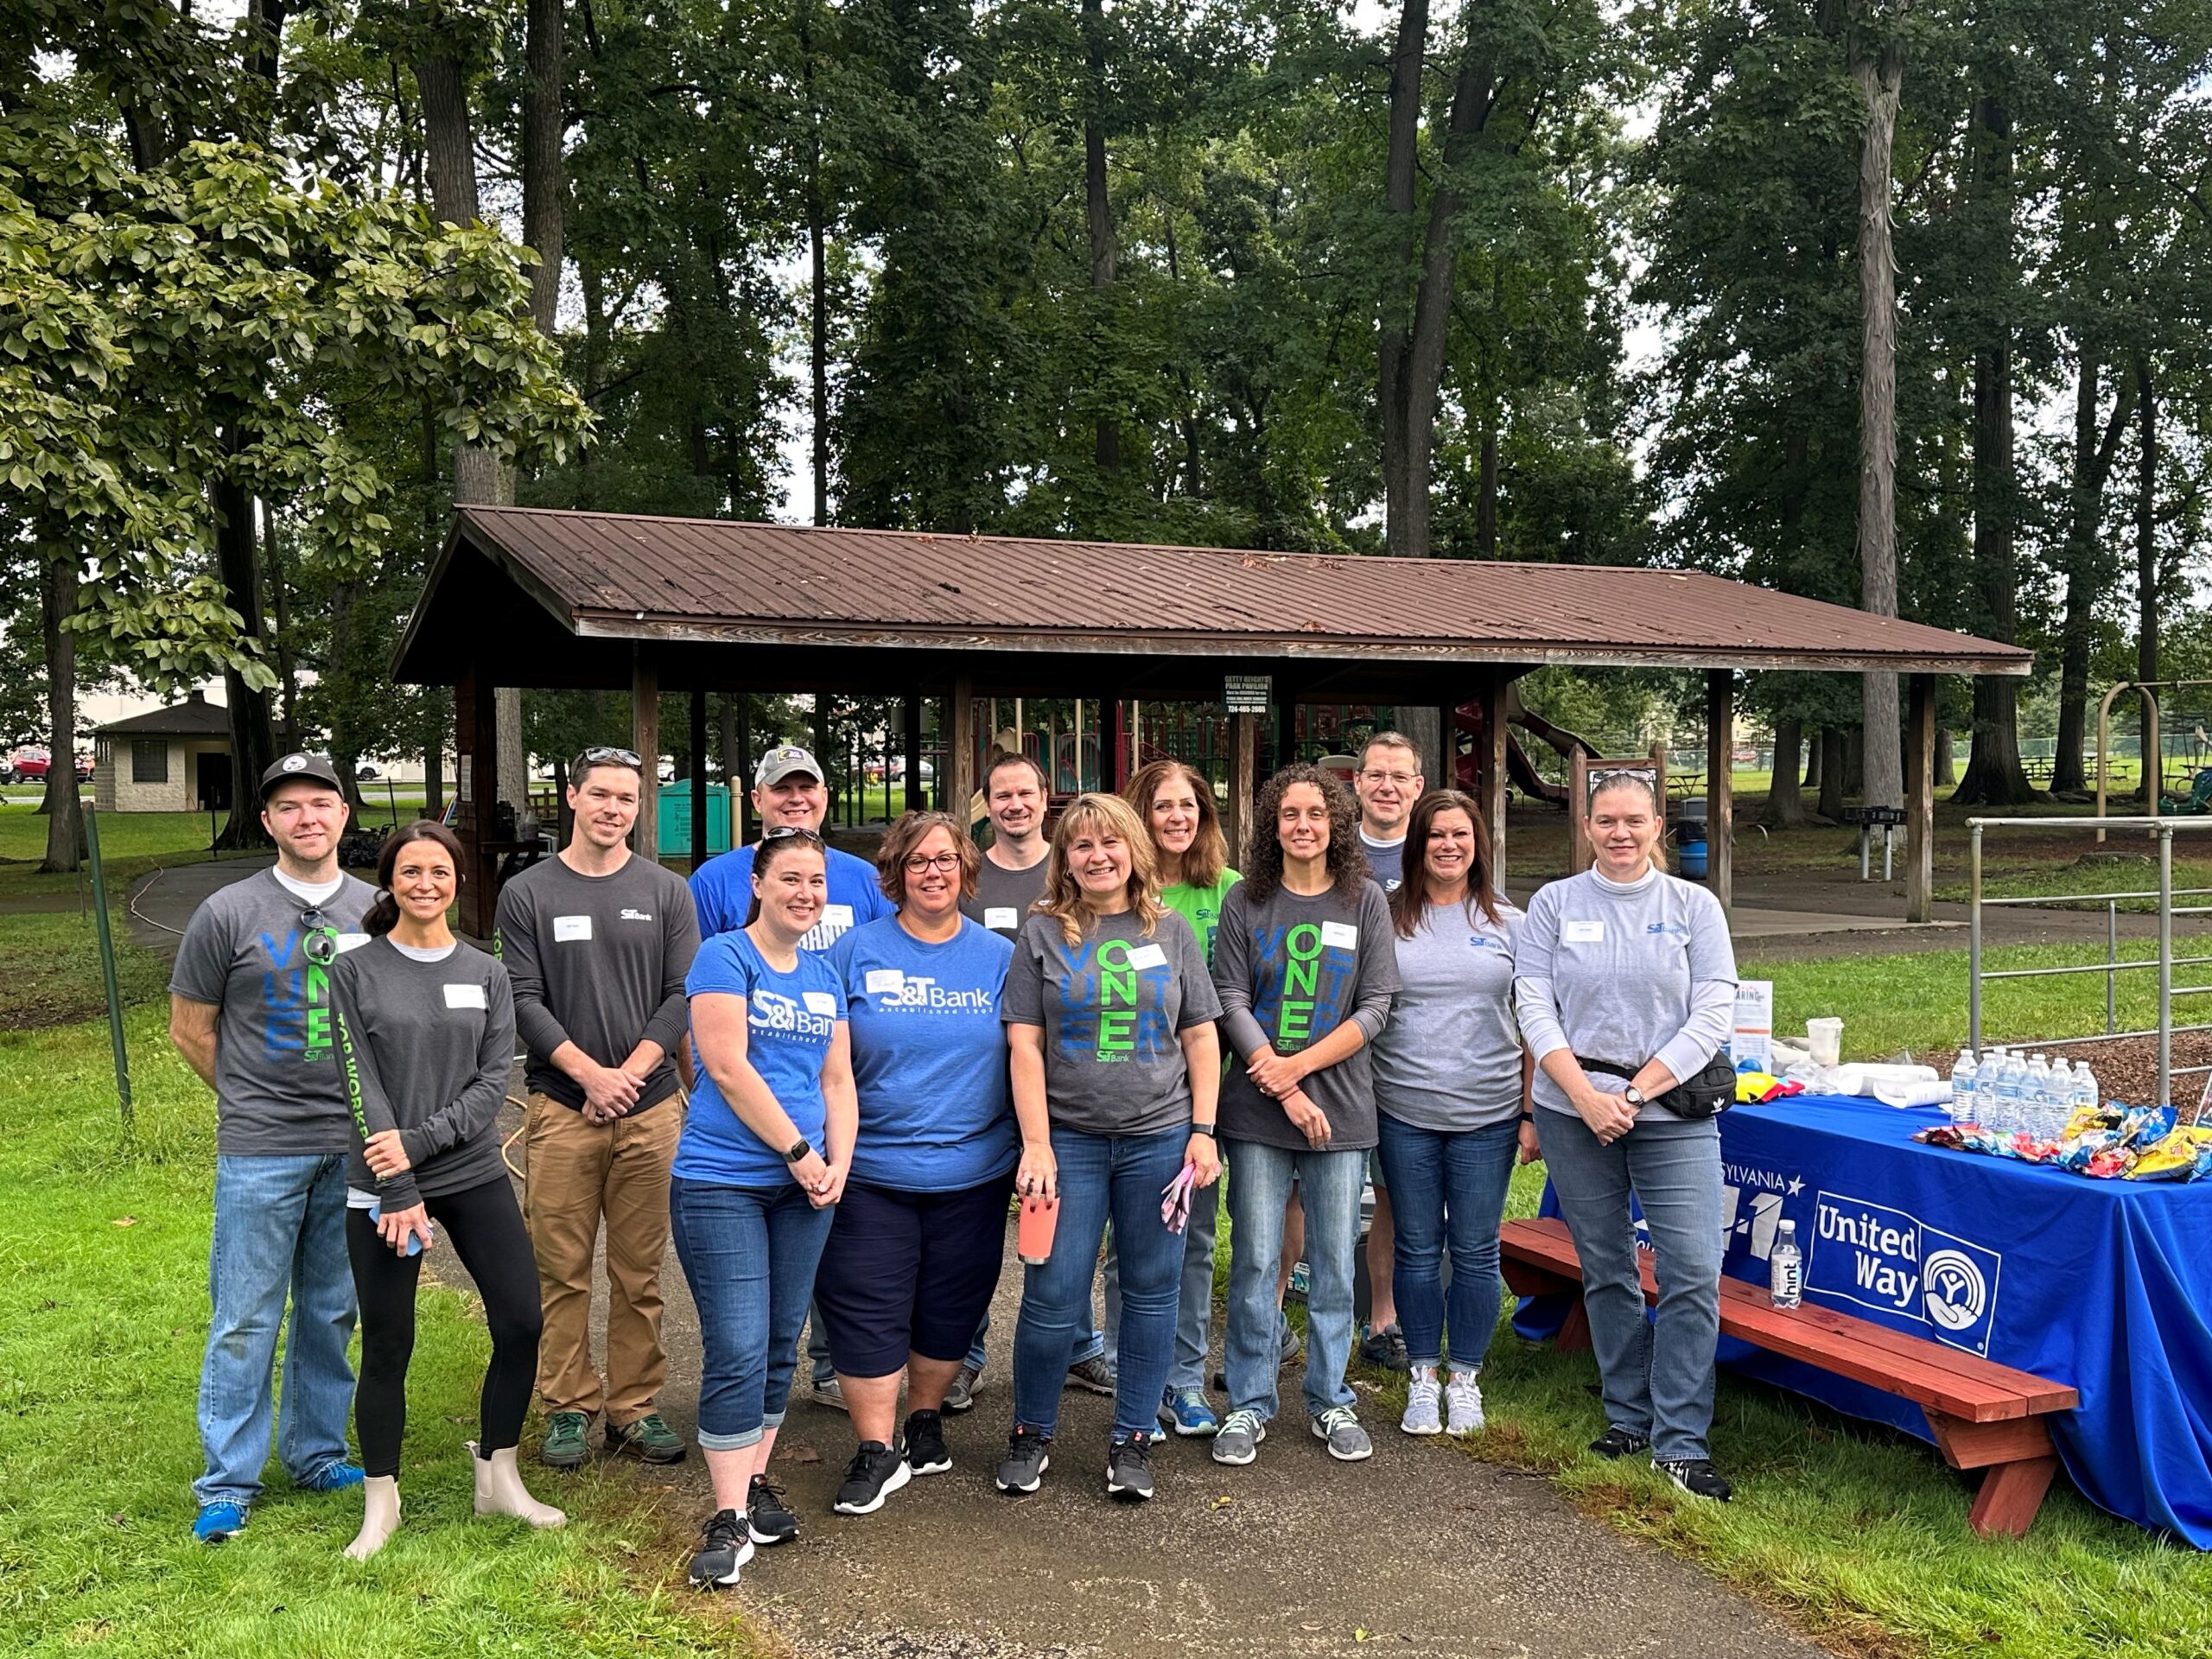 S&T employees volunteering at the park